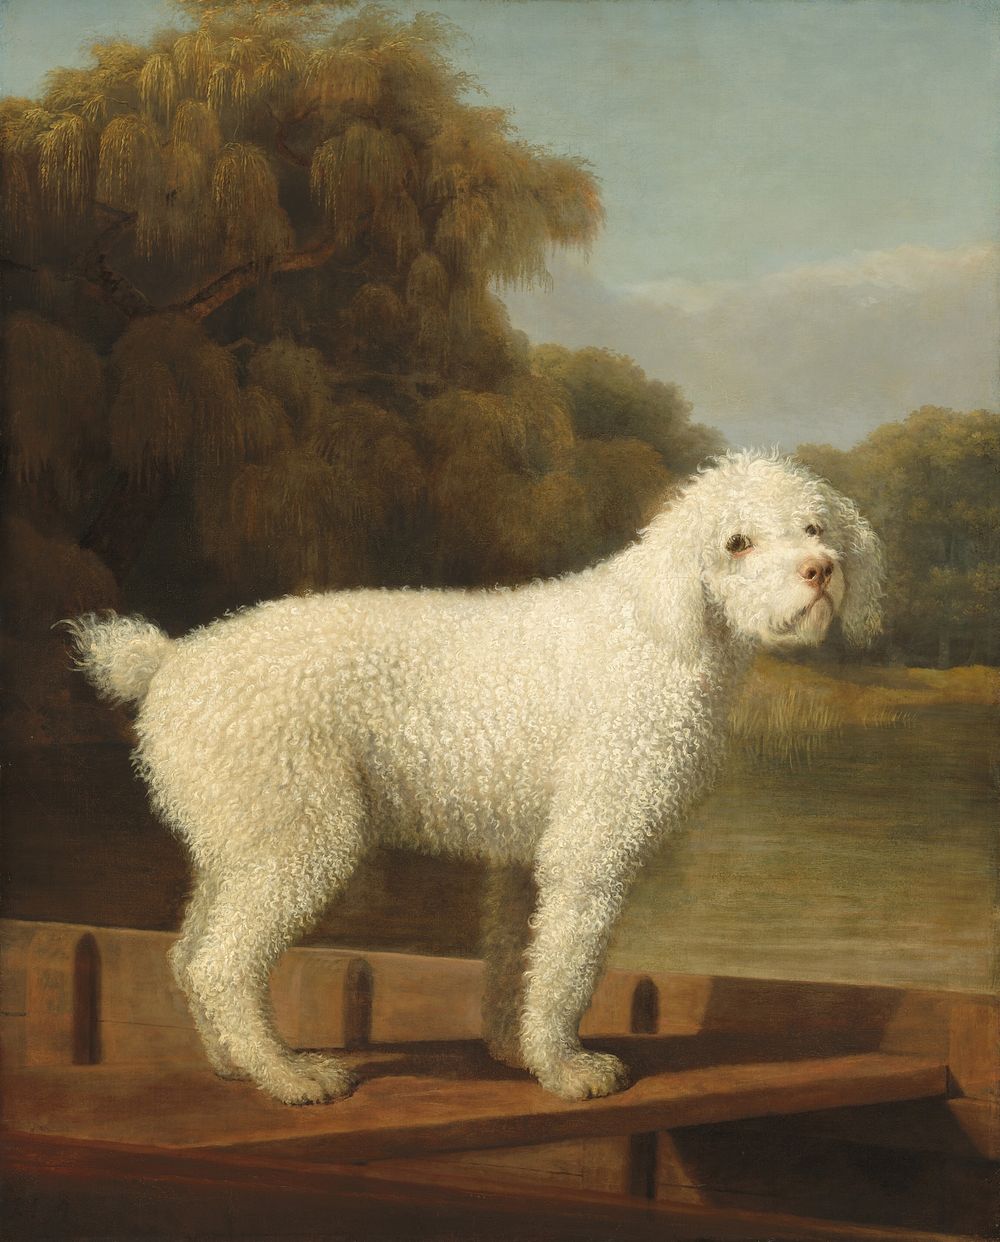 White Poodle in a Punt (ca. 1780) by George Stubbs.  